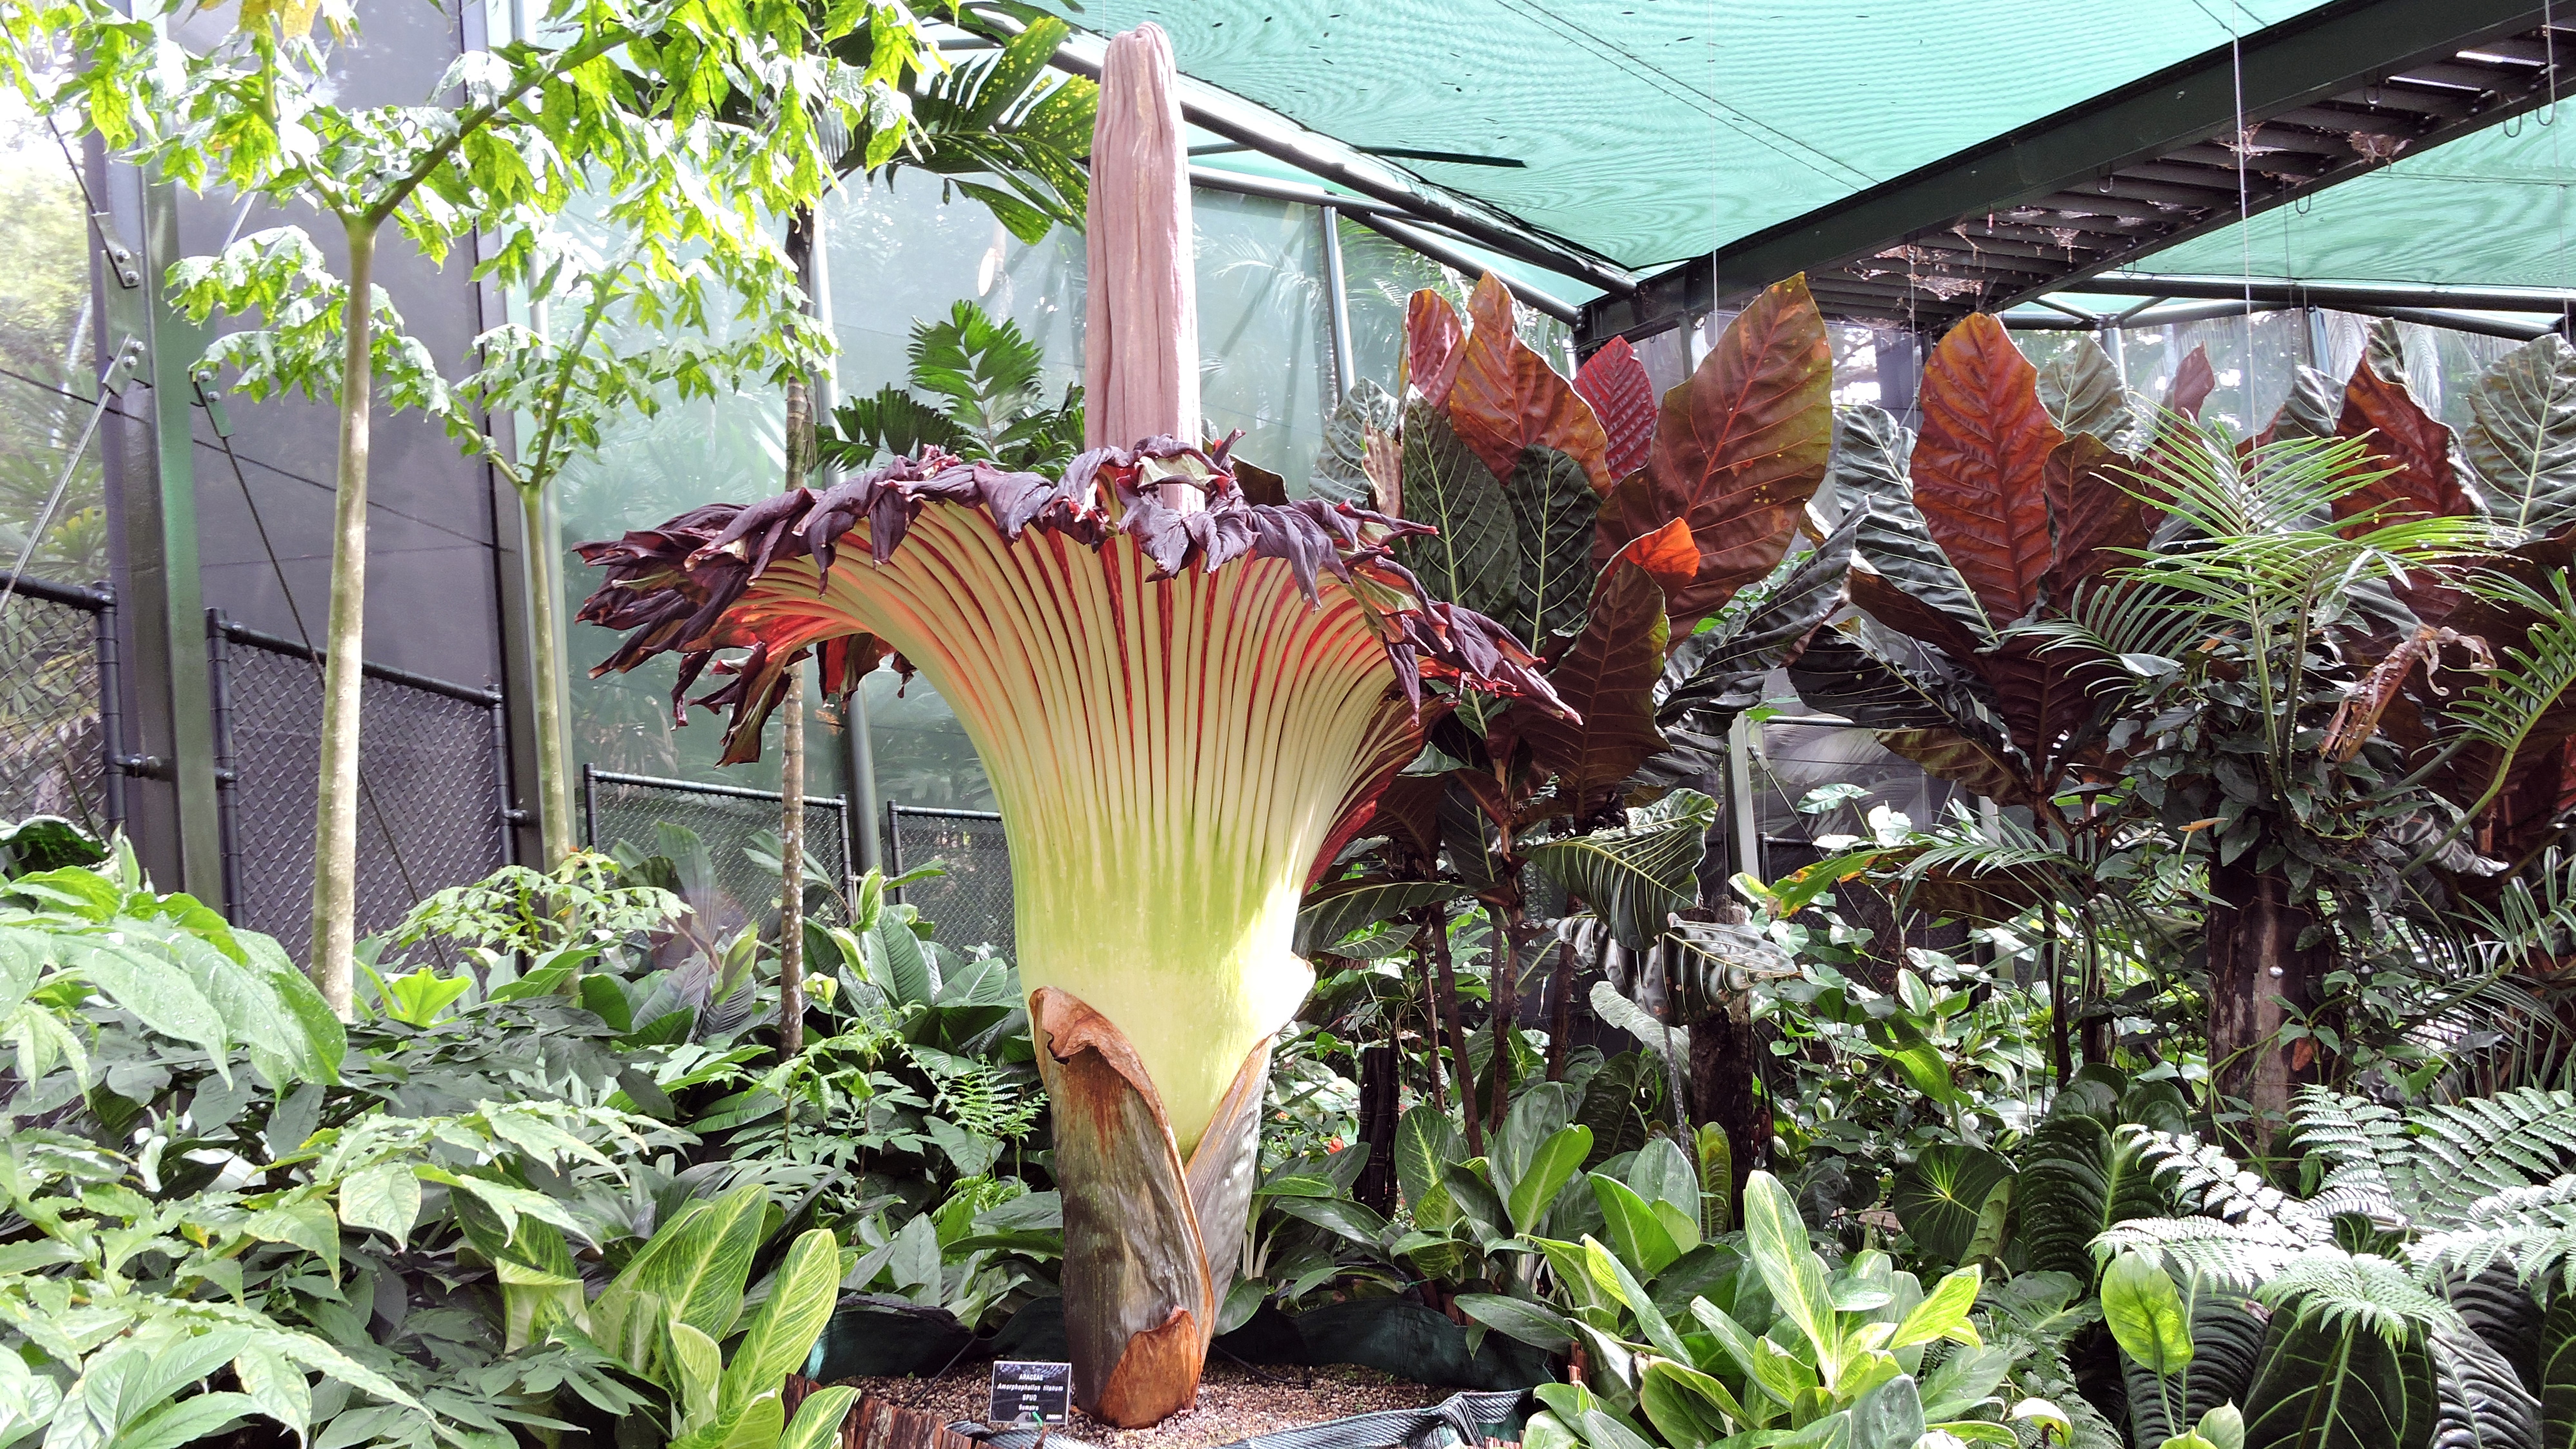 Corpse Flower: Facts about the smelly plant